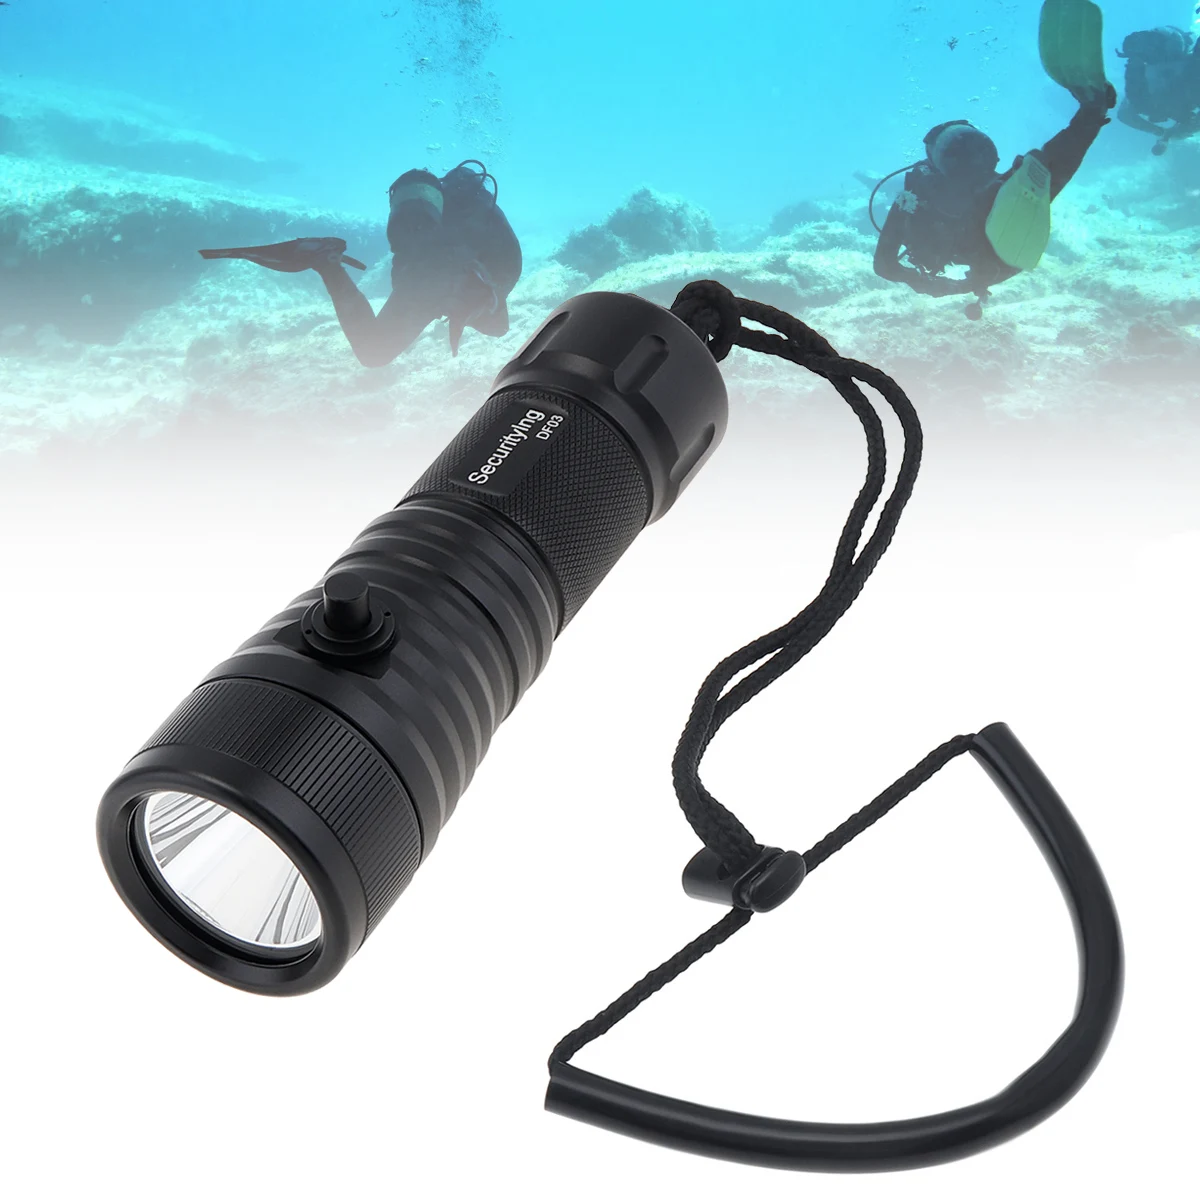 SecurityIng 3000 Lumen Diving Flashlight SST70 LED  Underwater 150M with 9 Degrees Narrow Beam IP68 Waterproof Scuba Dive Torch